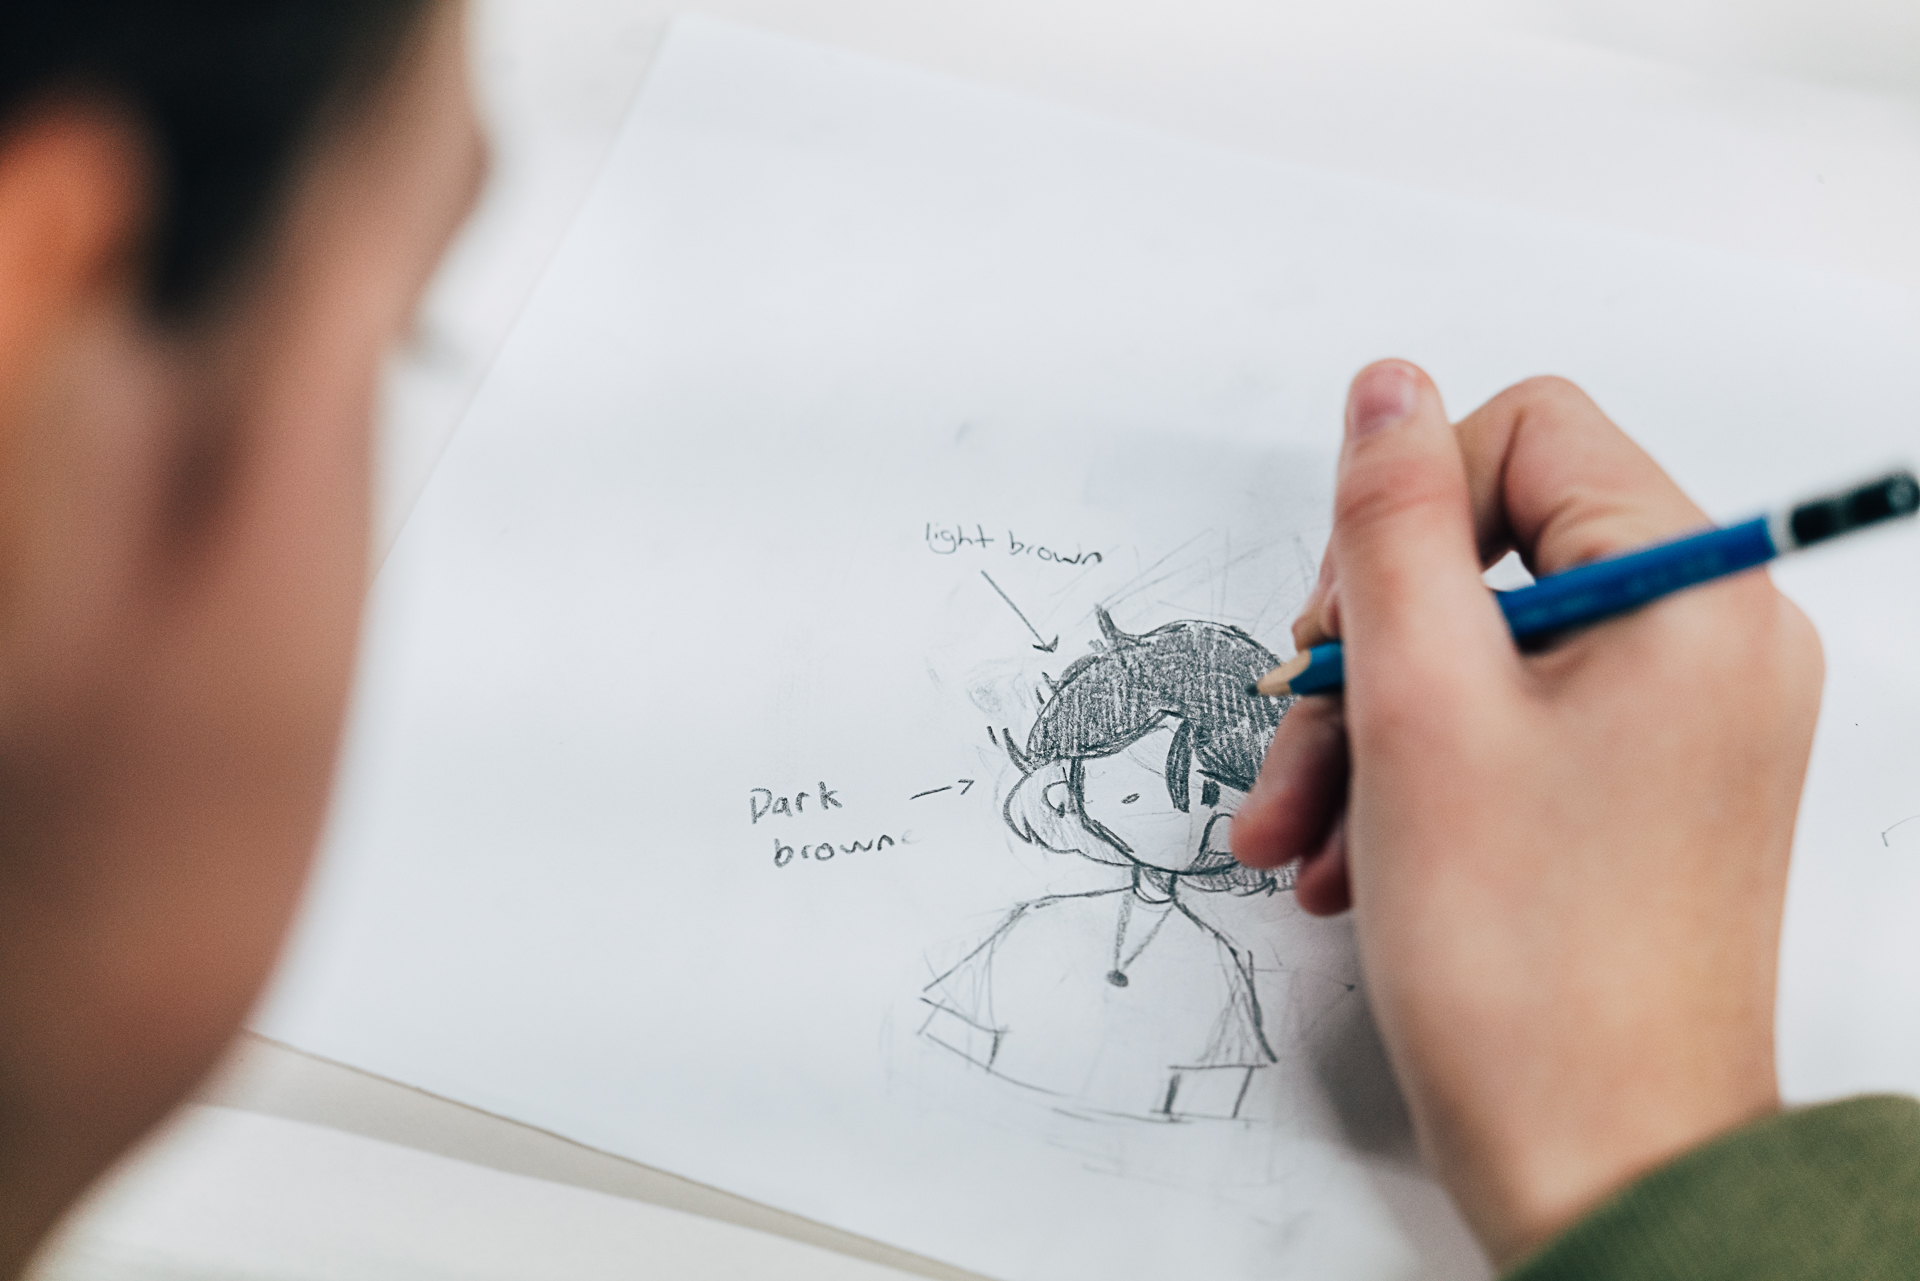 Teenager wearing green jumper drawing a character with graphite pencil on paper.